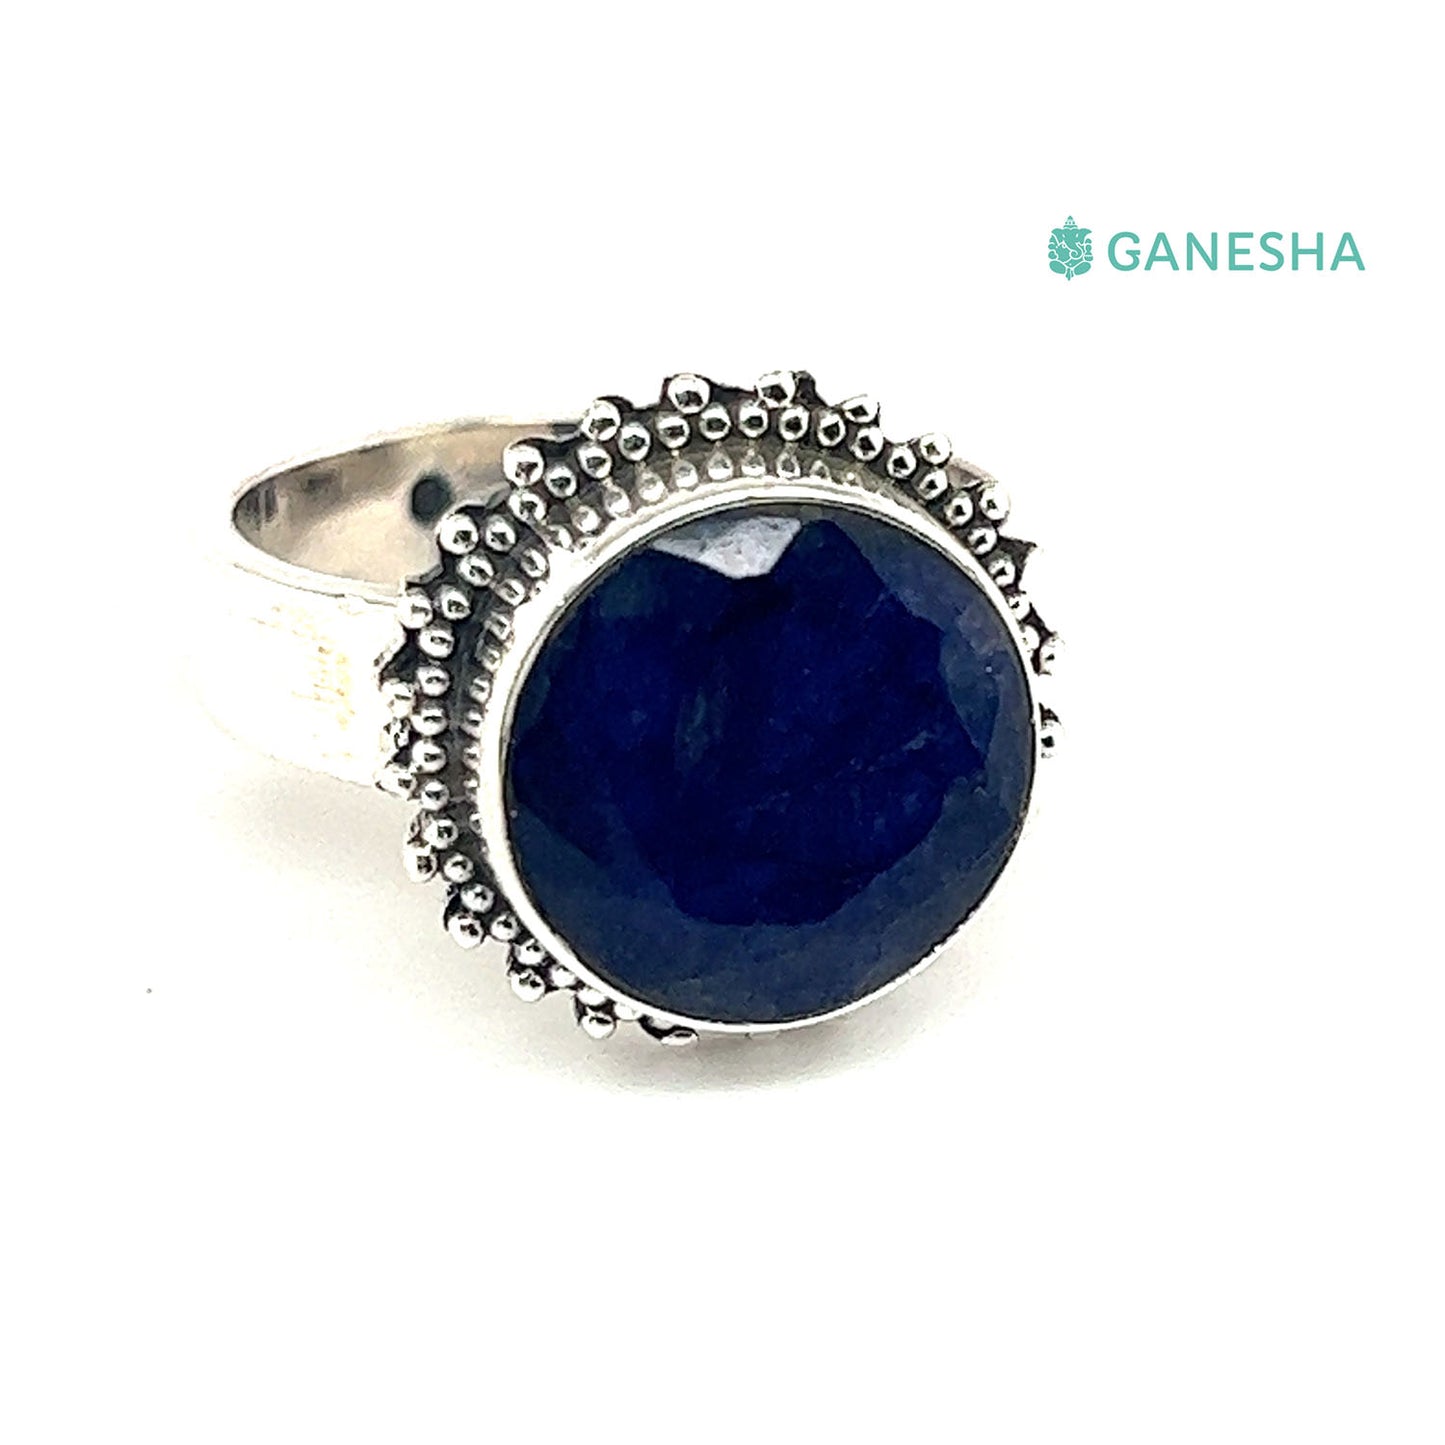 Ganesha Handicrafts, Blue Sapphire-925 Sterling Silver Jewellery Gift set with Chain, Blue Sapphire-925 Sterling Silver Jewellery Gift set with Chain, 925 Sterling Silver Jewellery Gift set with Chain, Blue Sapphire Sterling Silver Jewellery Gift set with Chain, Women's Fashion Sterling Silver Jewellery .